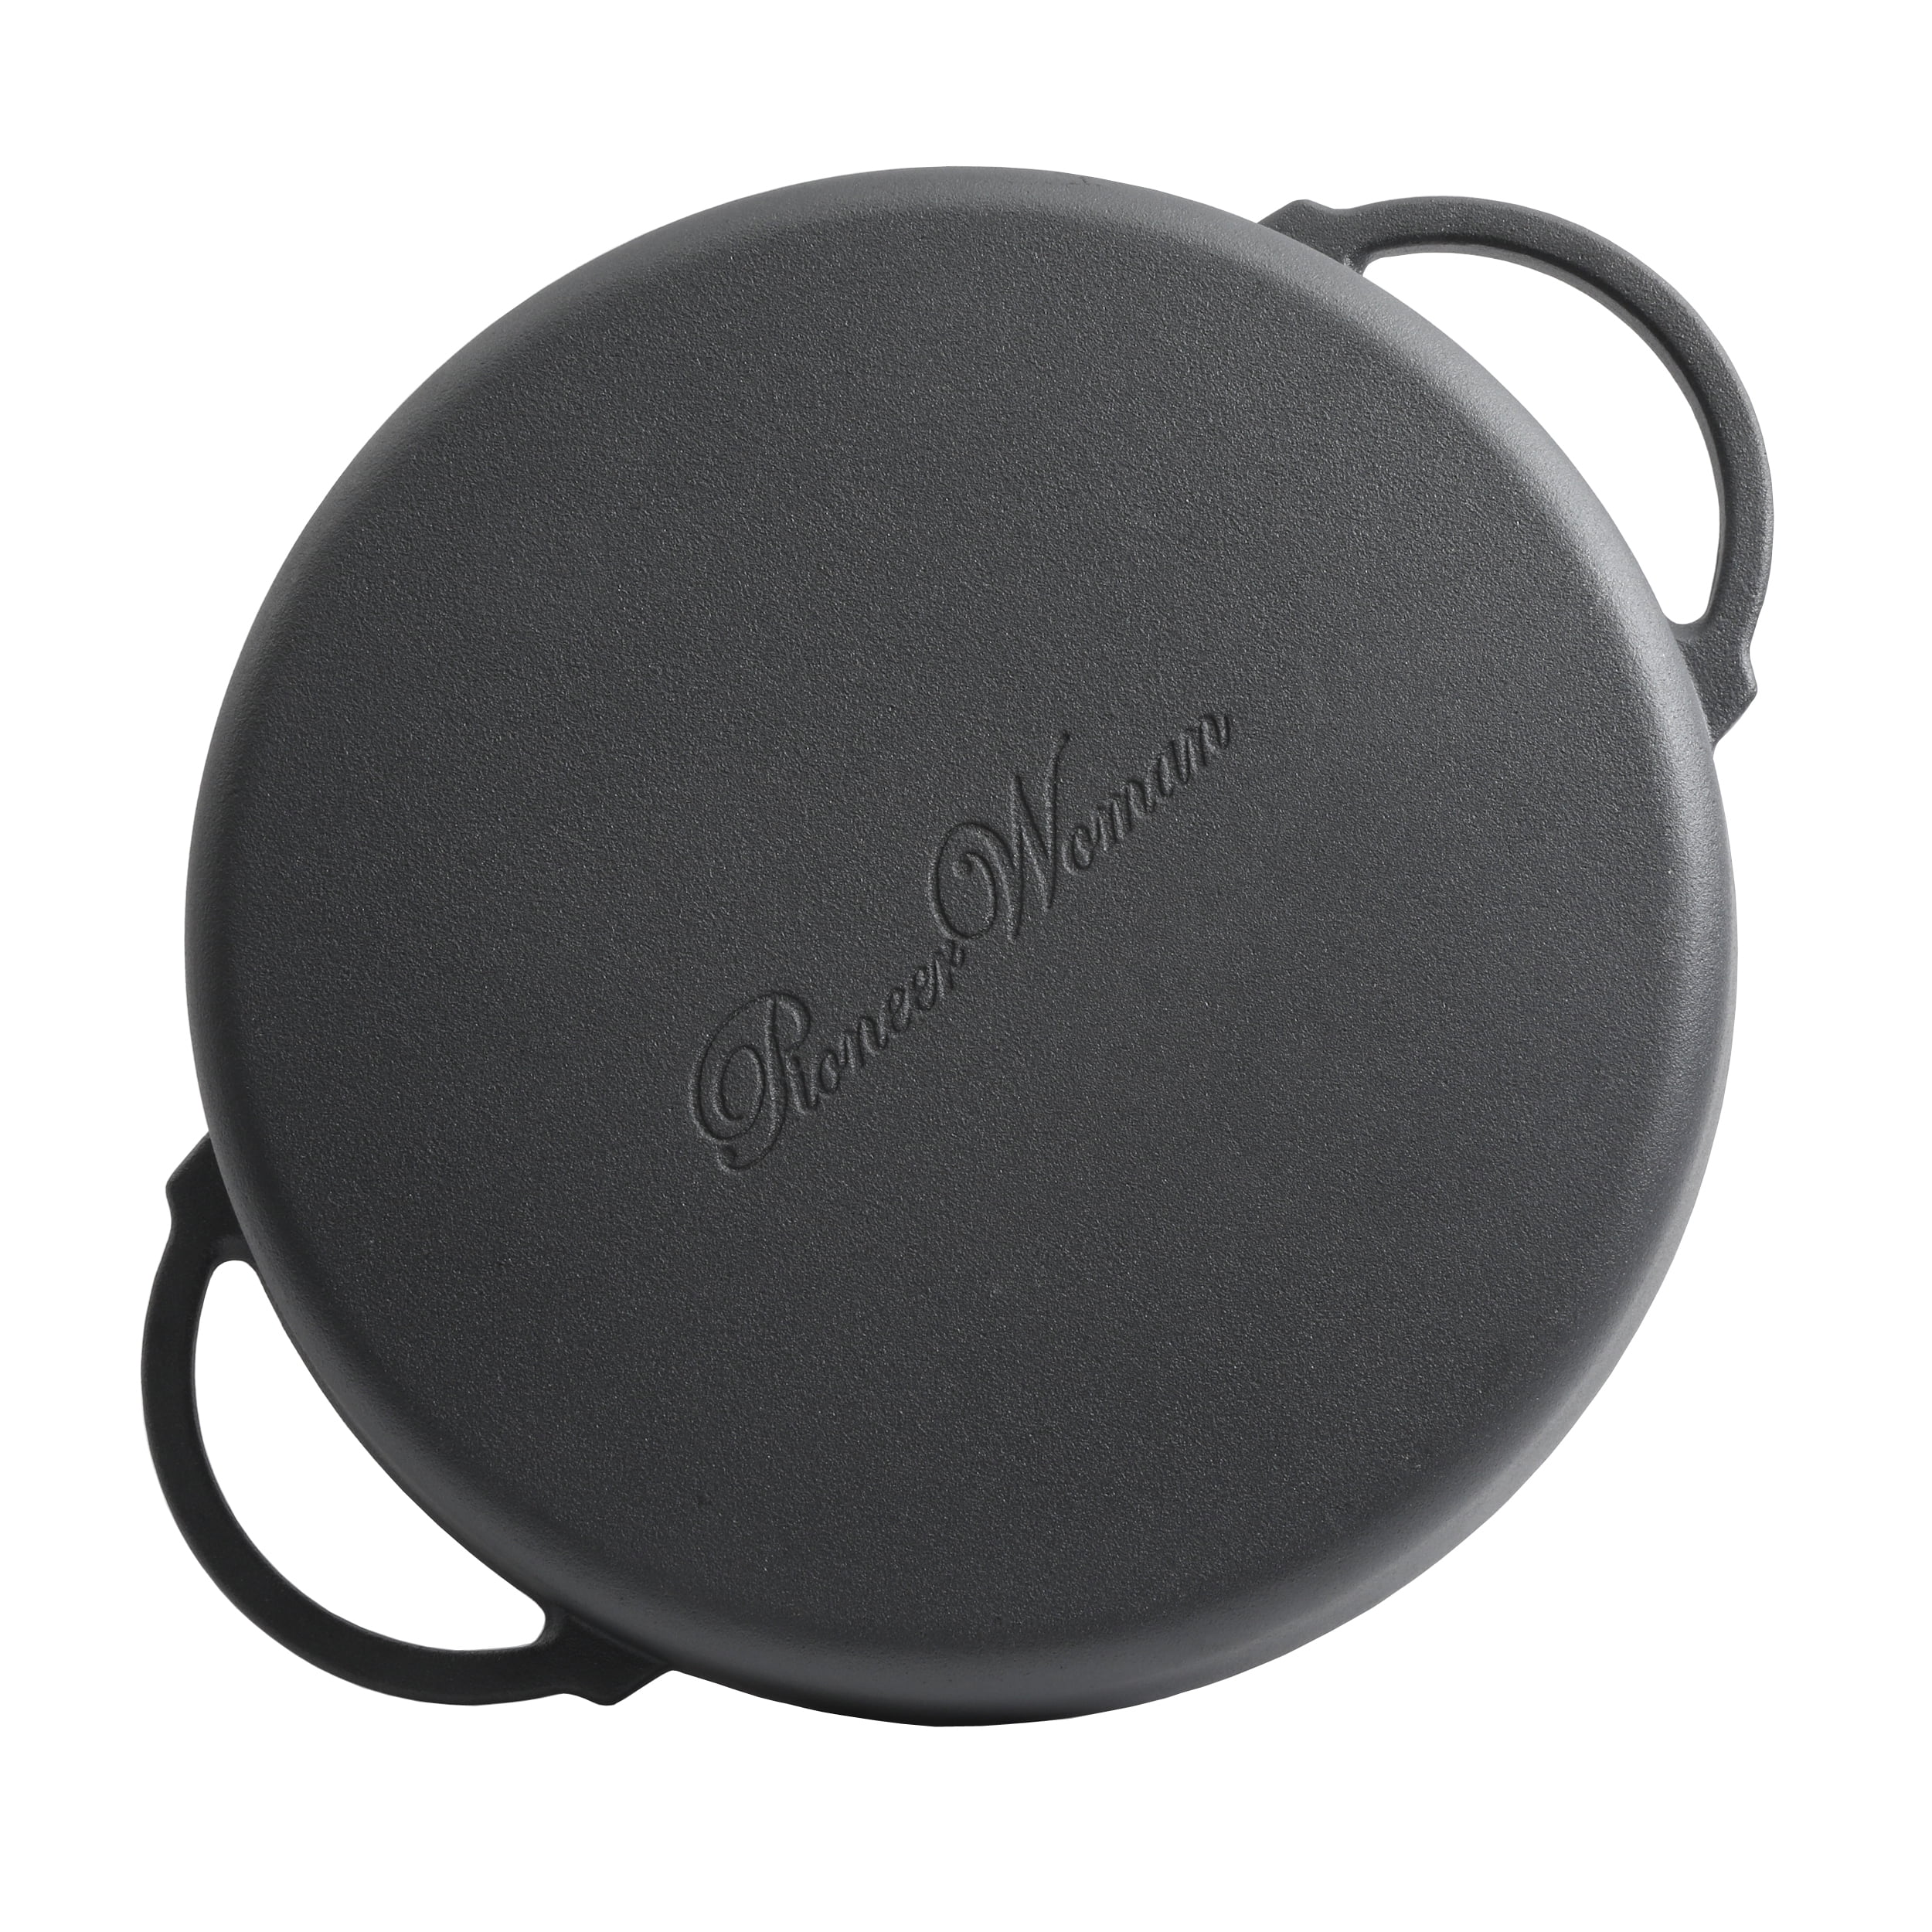 Pioneers used cast-iron cookware